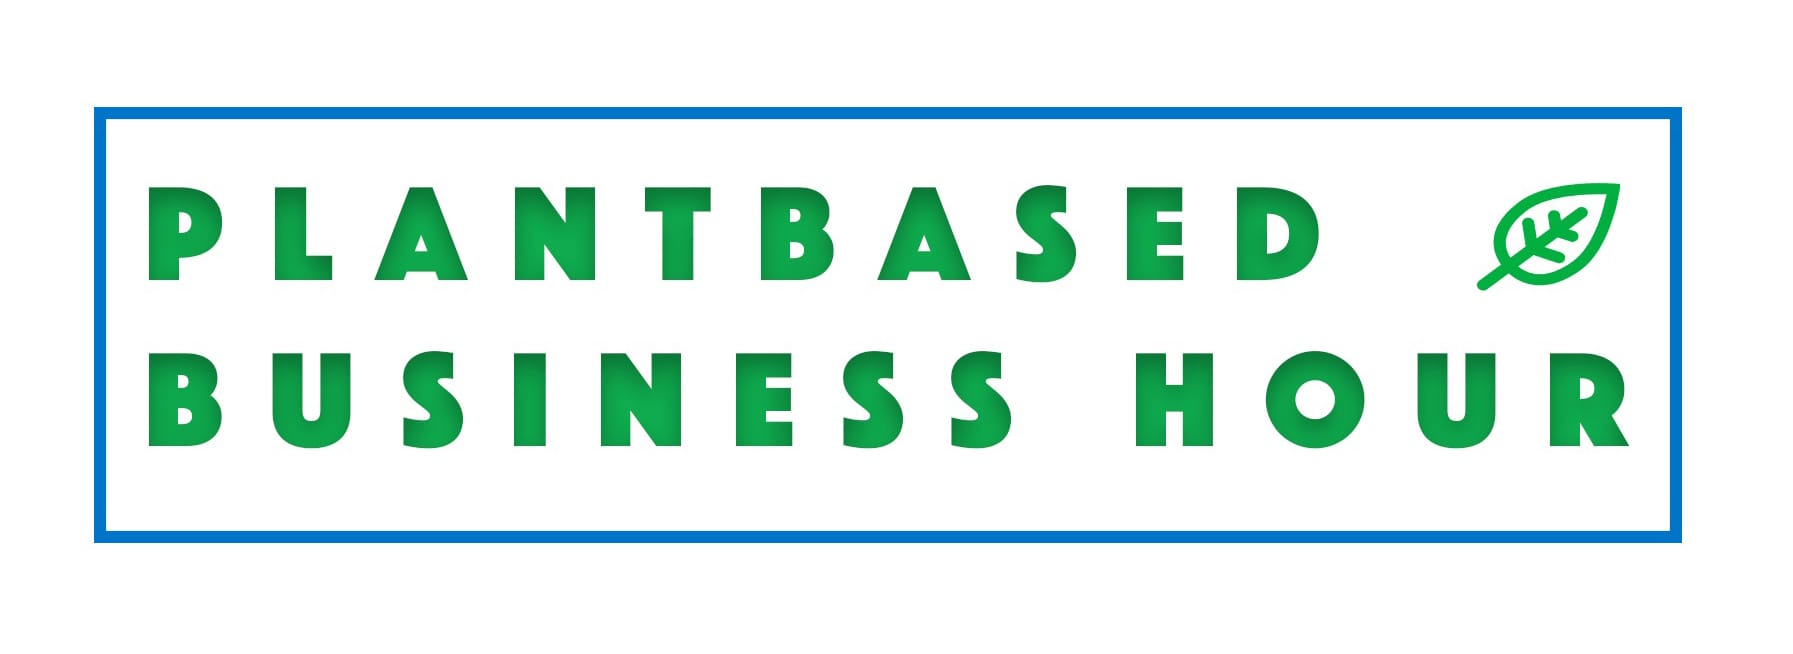 Plantbased Business Hour